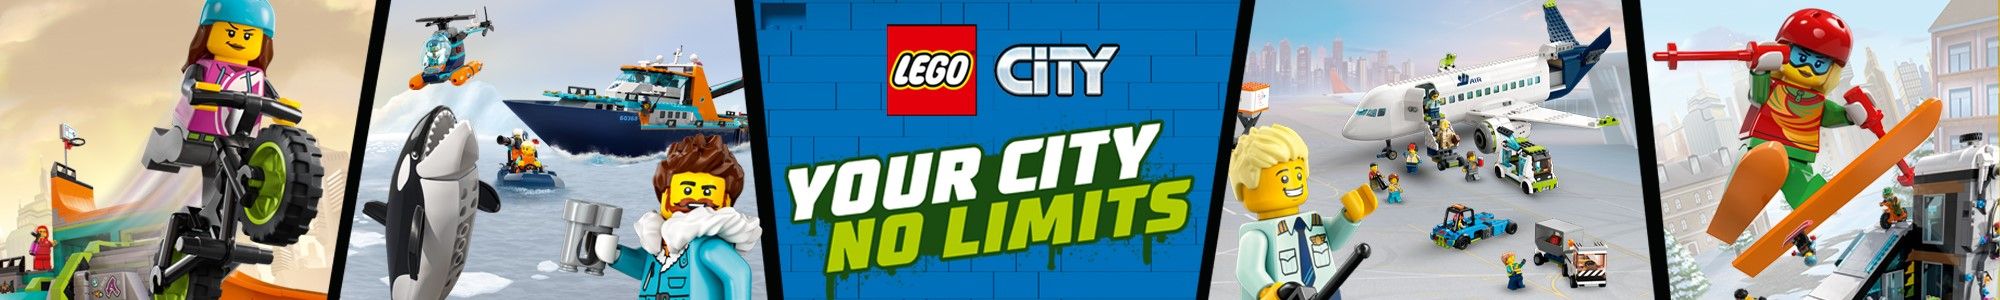 LEGO_210773_The Ent_City_Brand Page Banner_2000x300px.jpeg